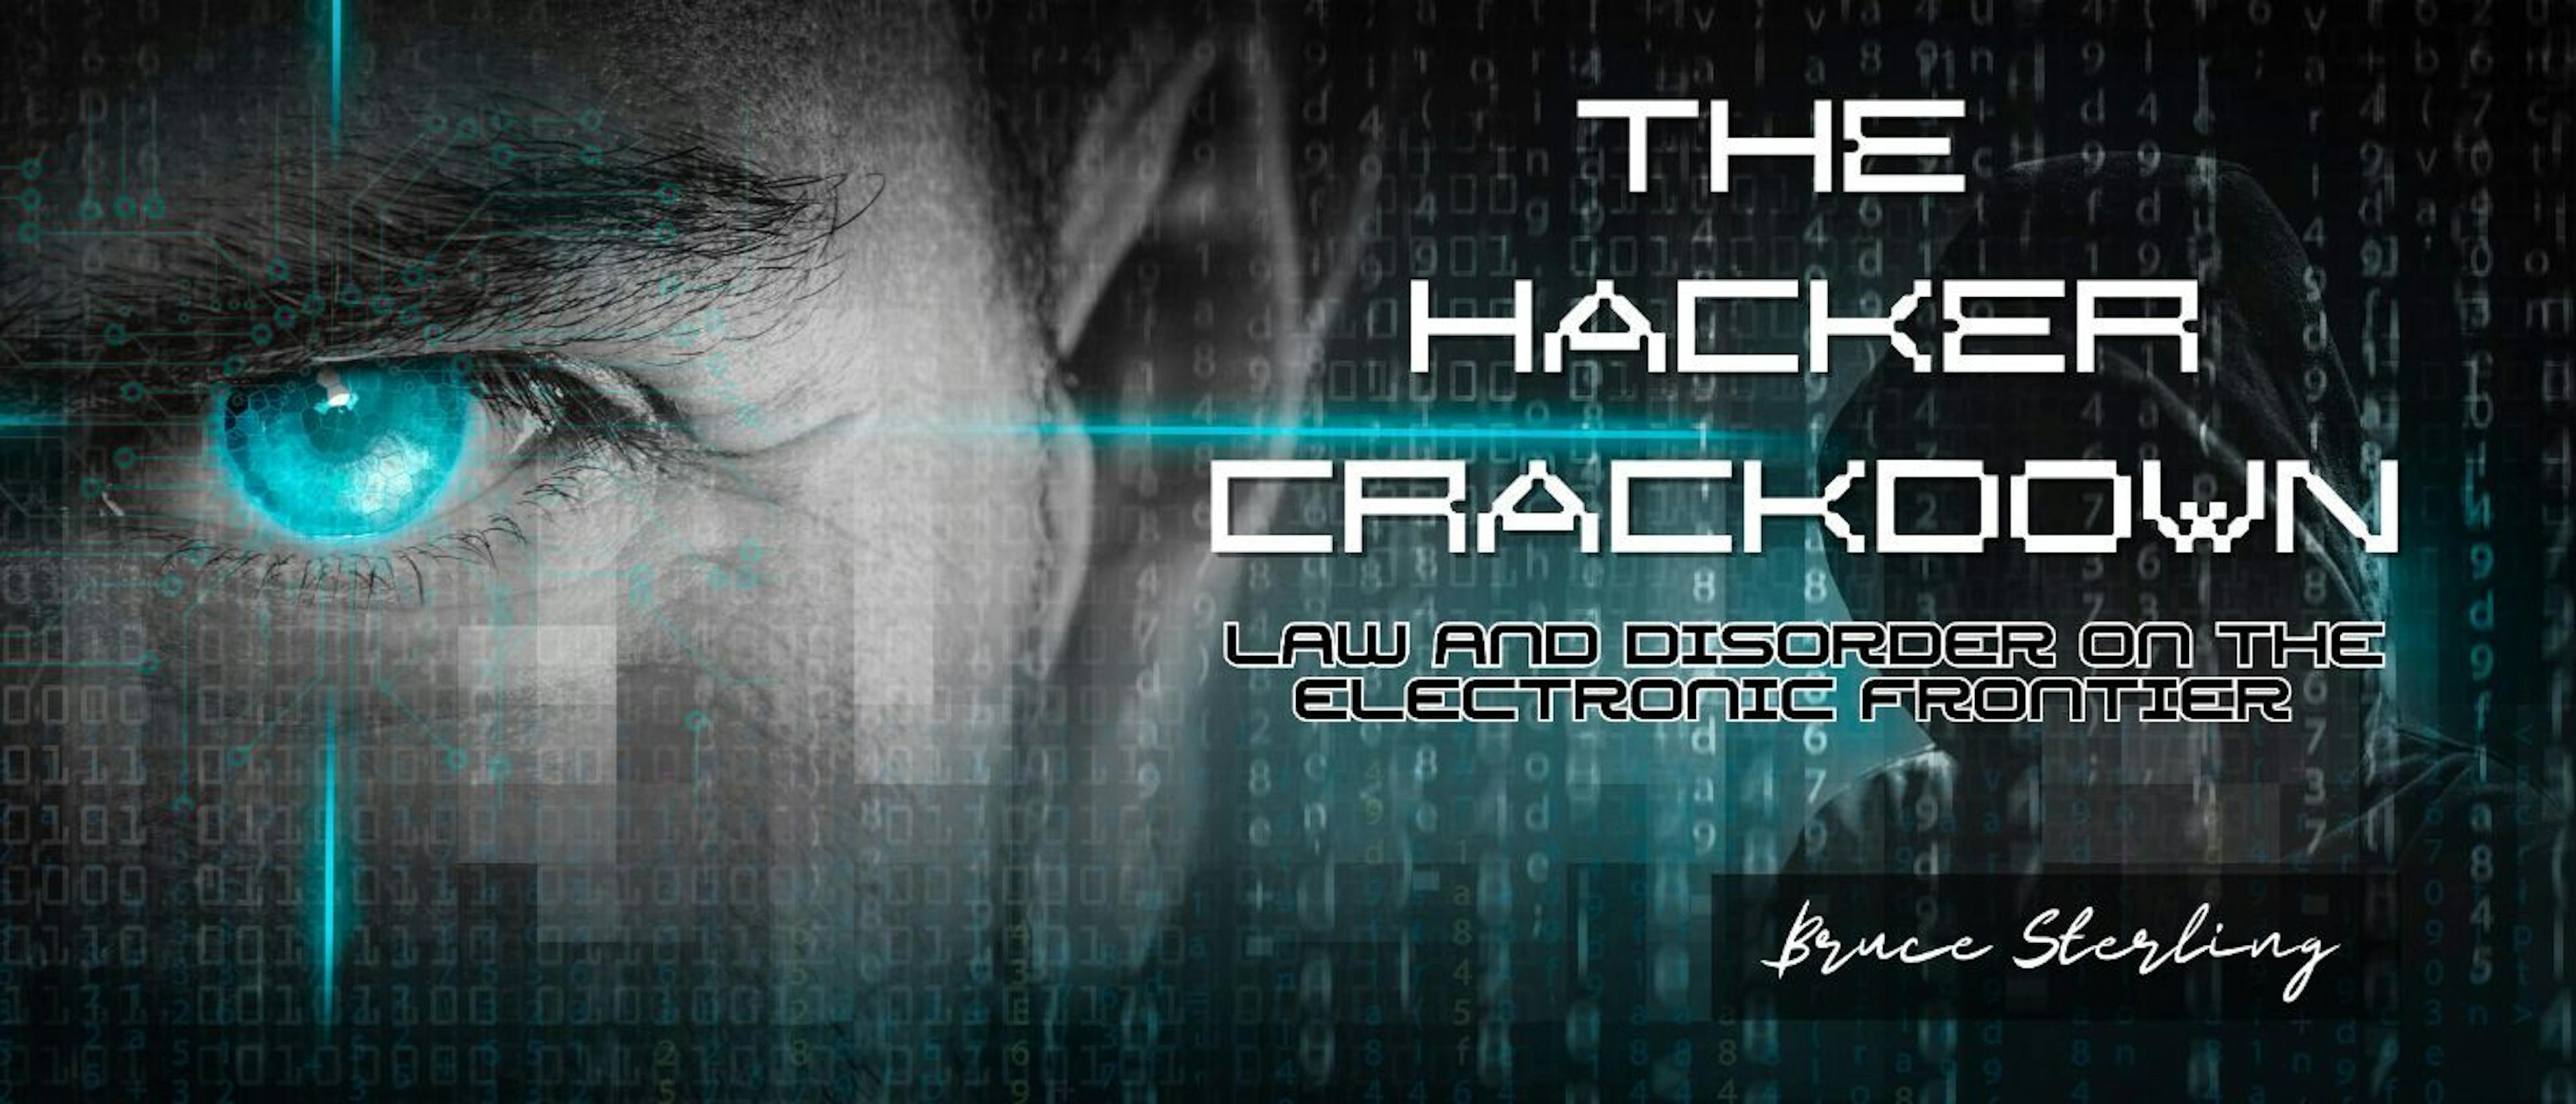 featured image - CHRONOLOGY OF THE HACKER CRACKDOWN